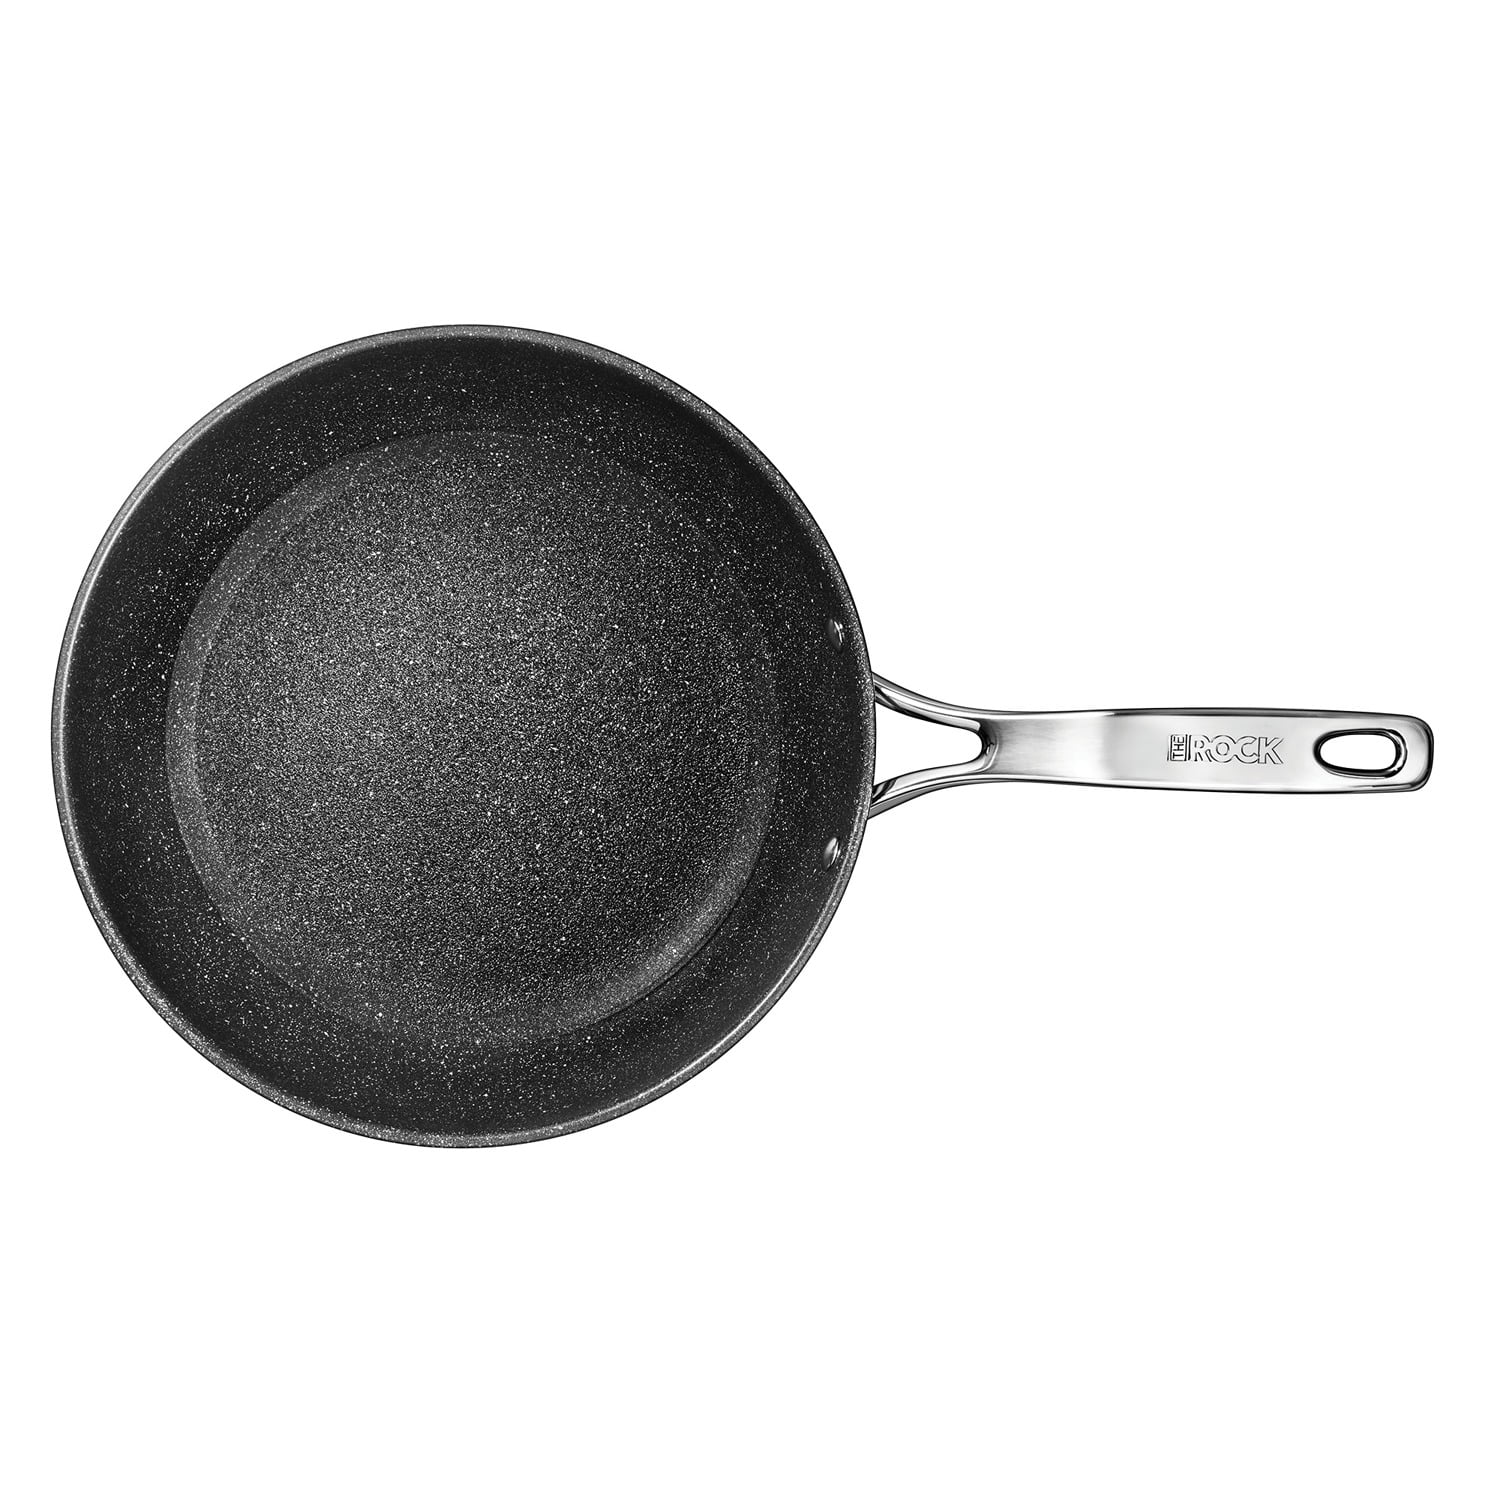 STARFRIT The Rock 034721-004-0000 Non-Stick 9.5" Inch Fry Pan Metal Handle 